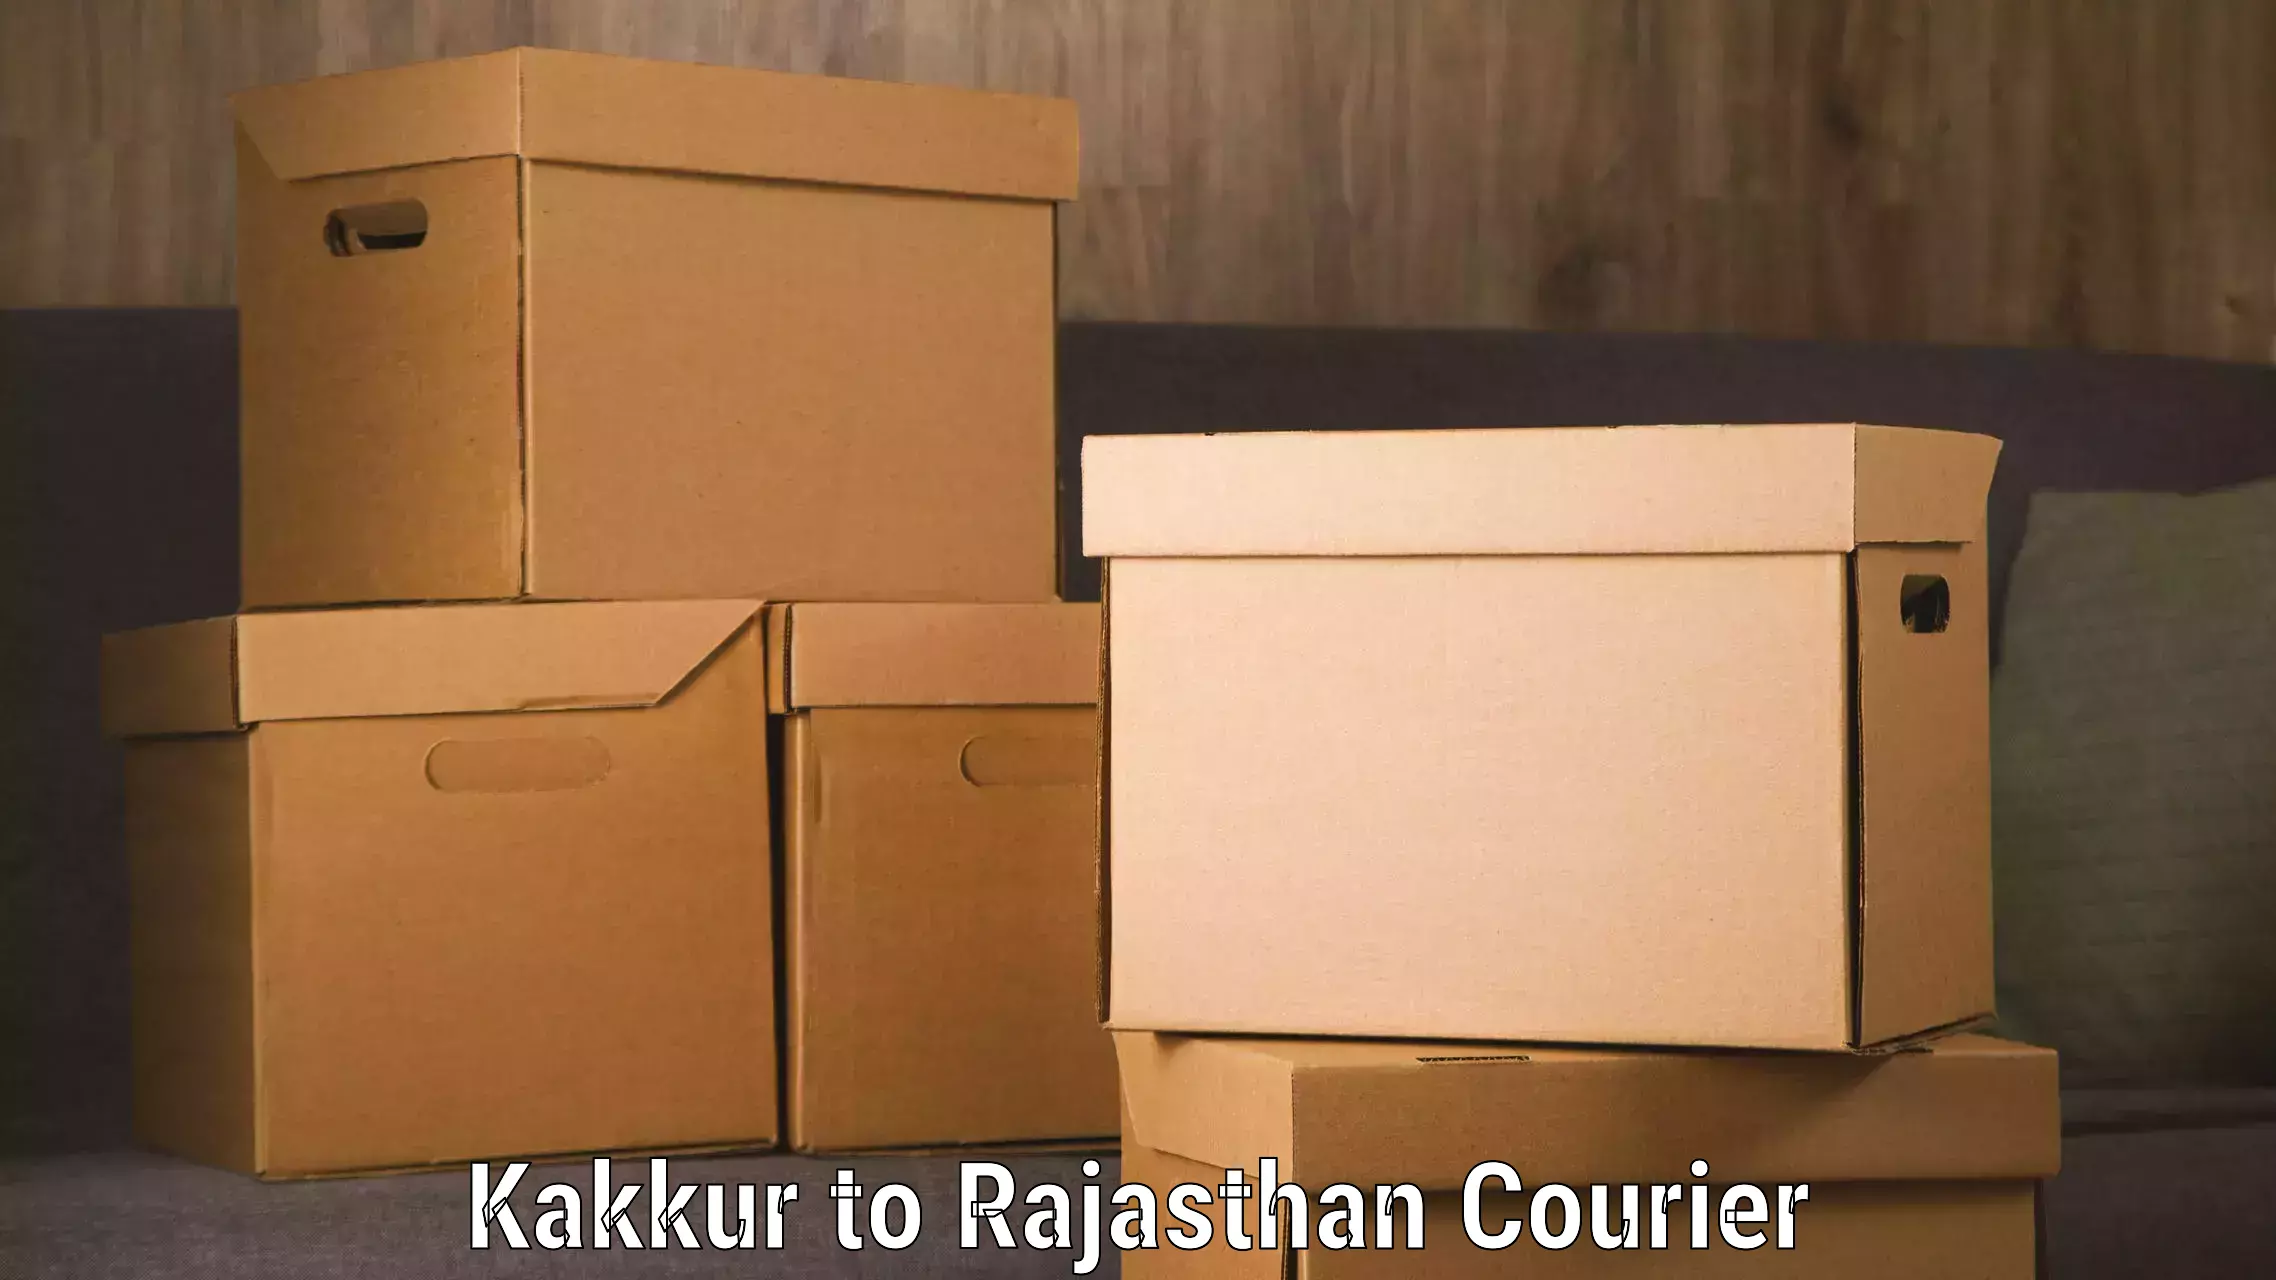 Urgent courier needs Kakkur to Yeswanthapur